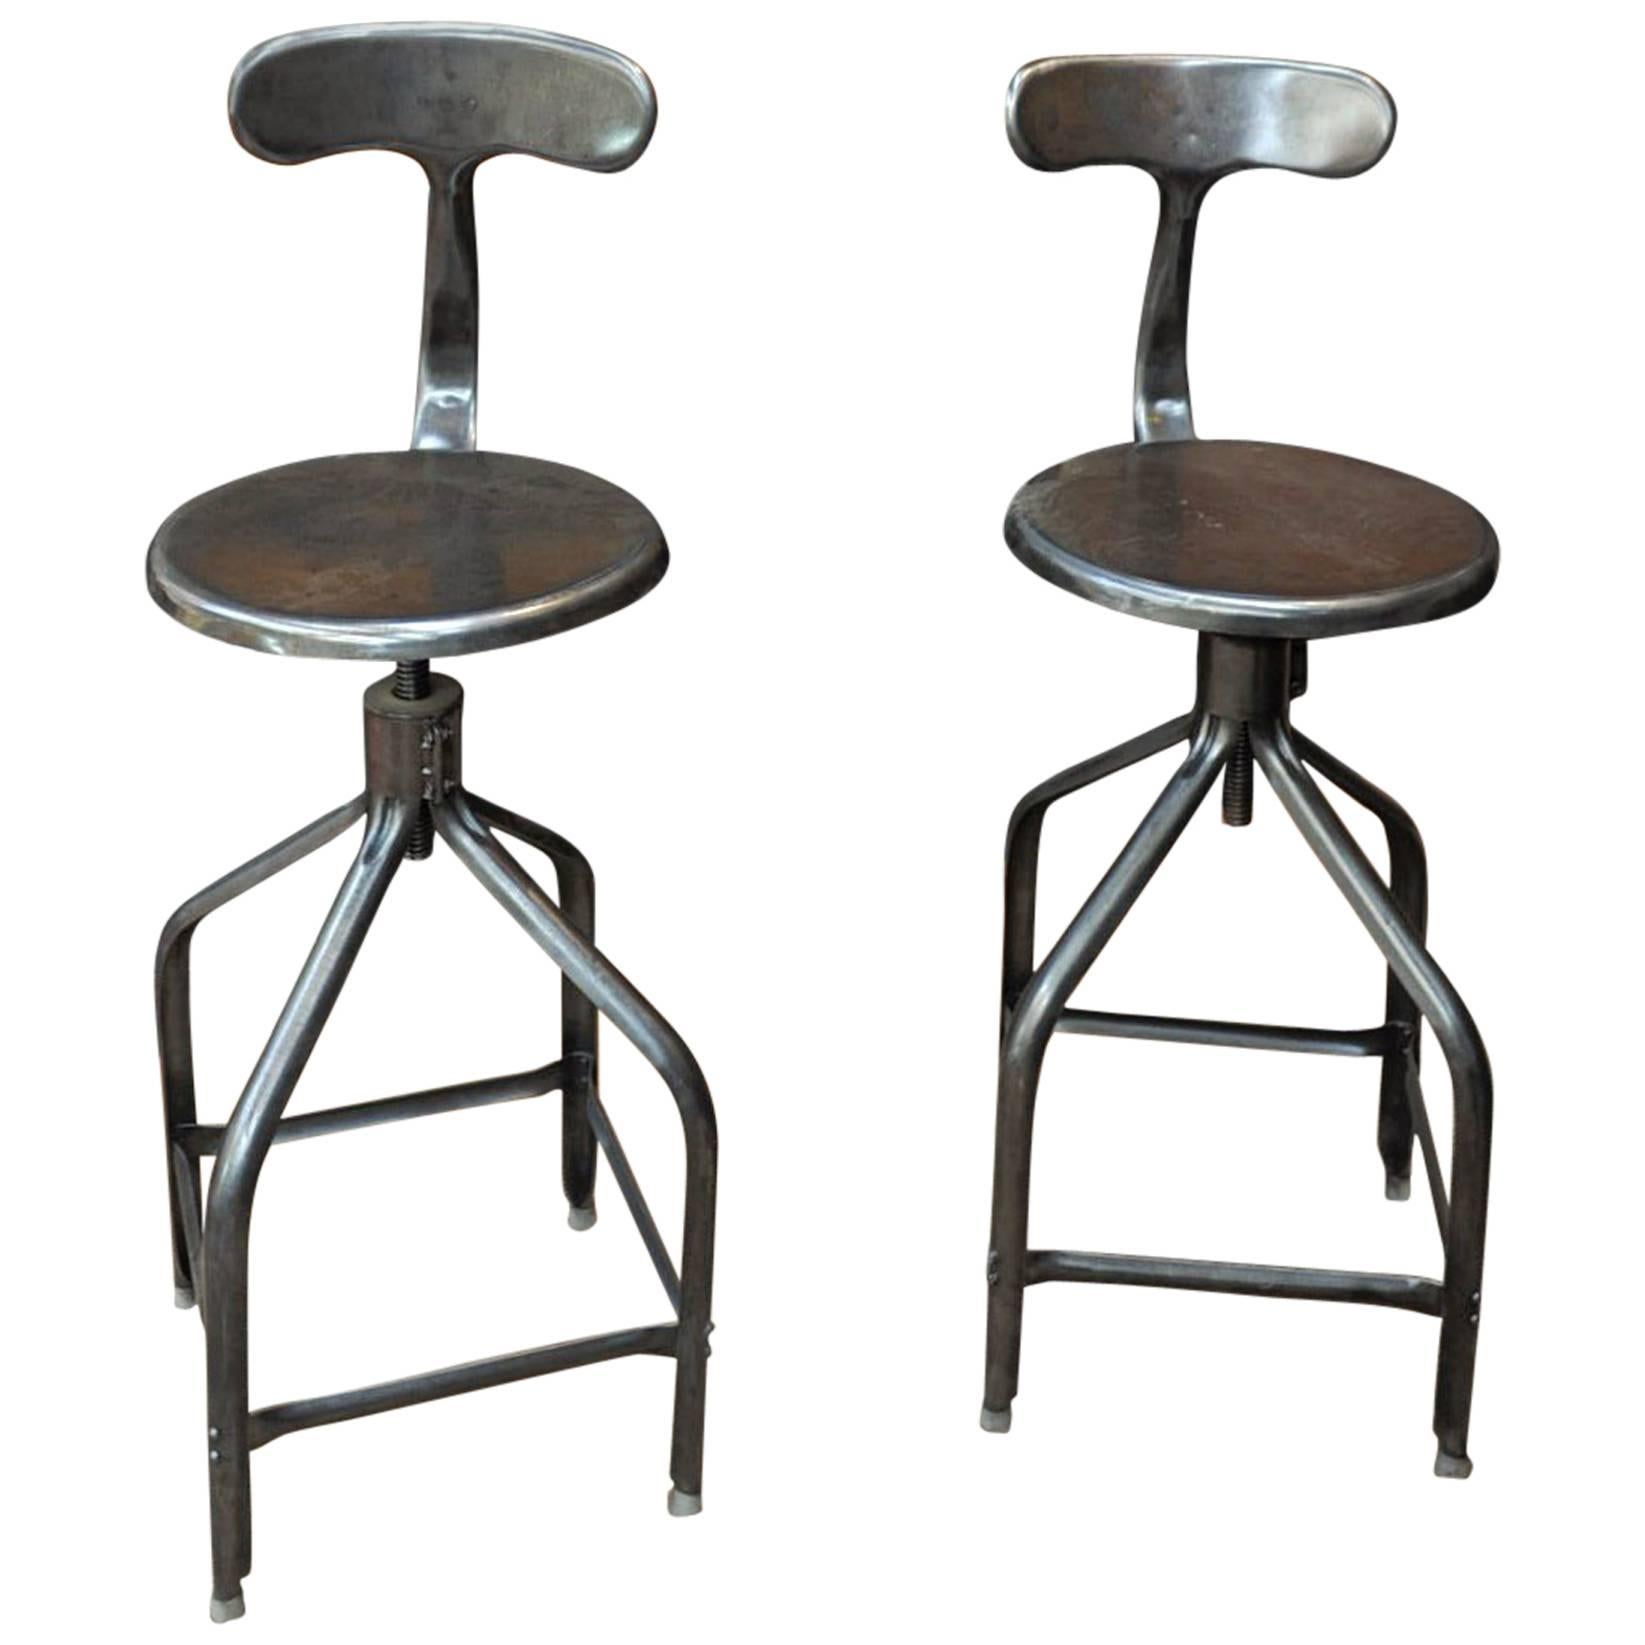 Adjustable High Stools Whale Tail Back by Nicolle, 1940s